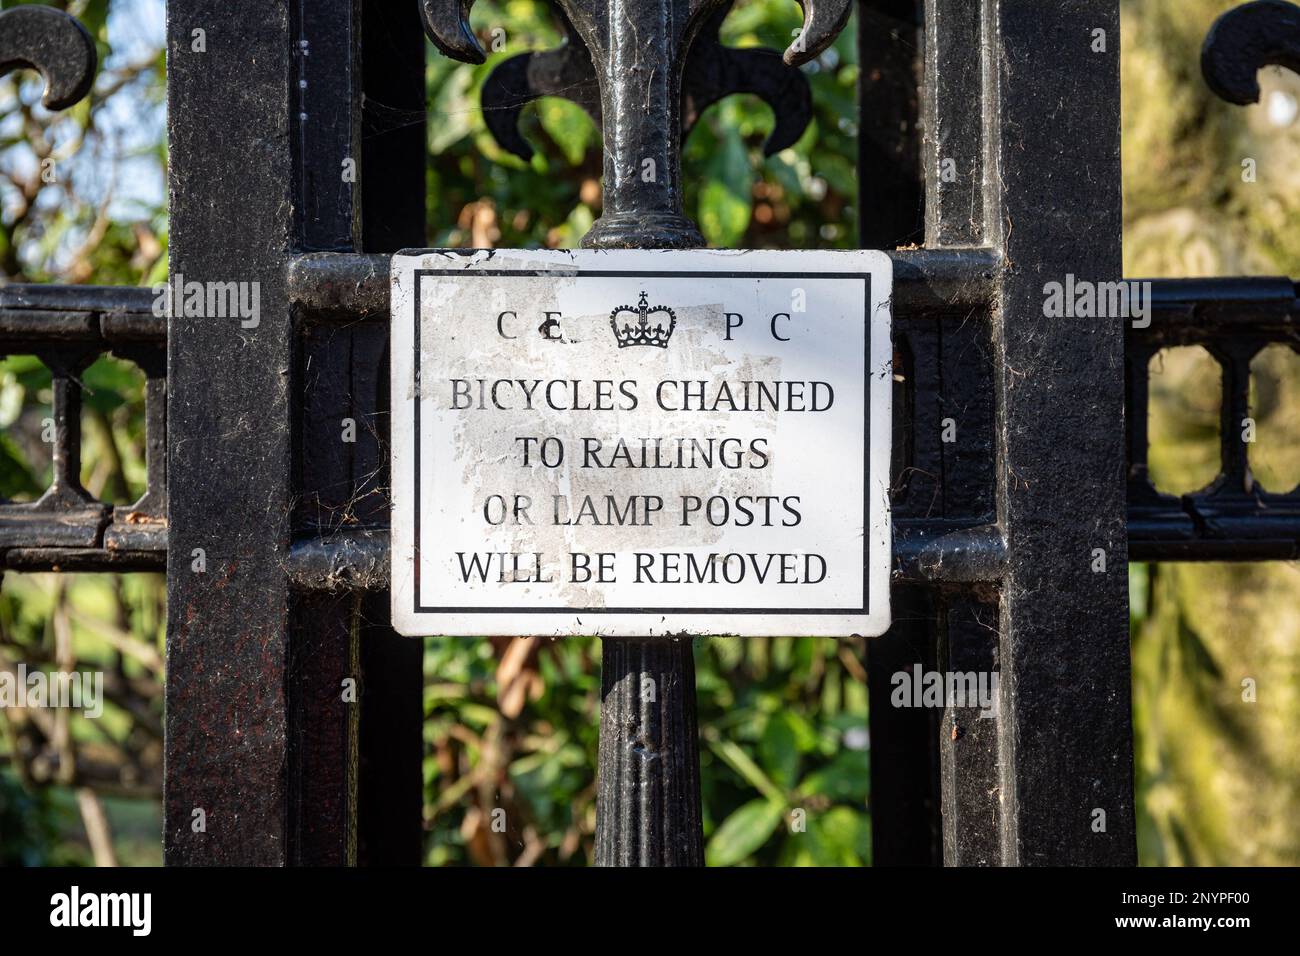 Bicycles chained to railings or lamp posts will be removed. Sign on Park Square private park fence in London, England. Stock Photo